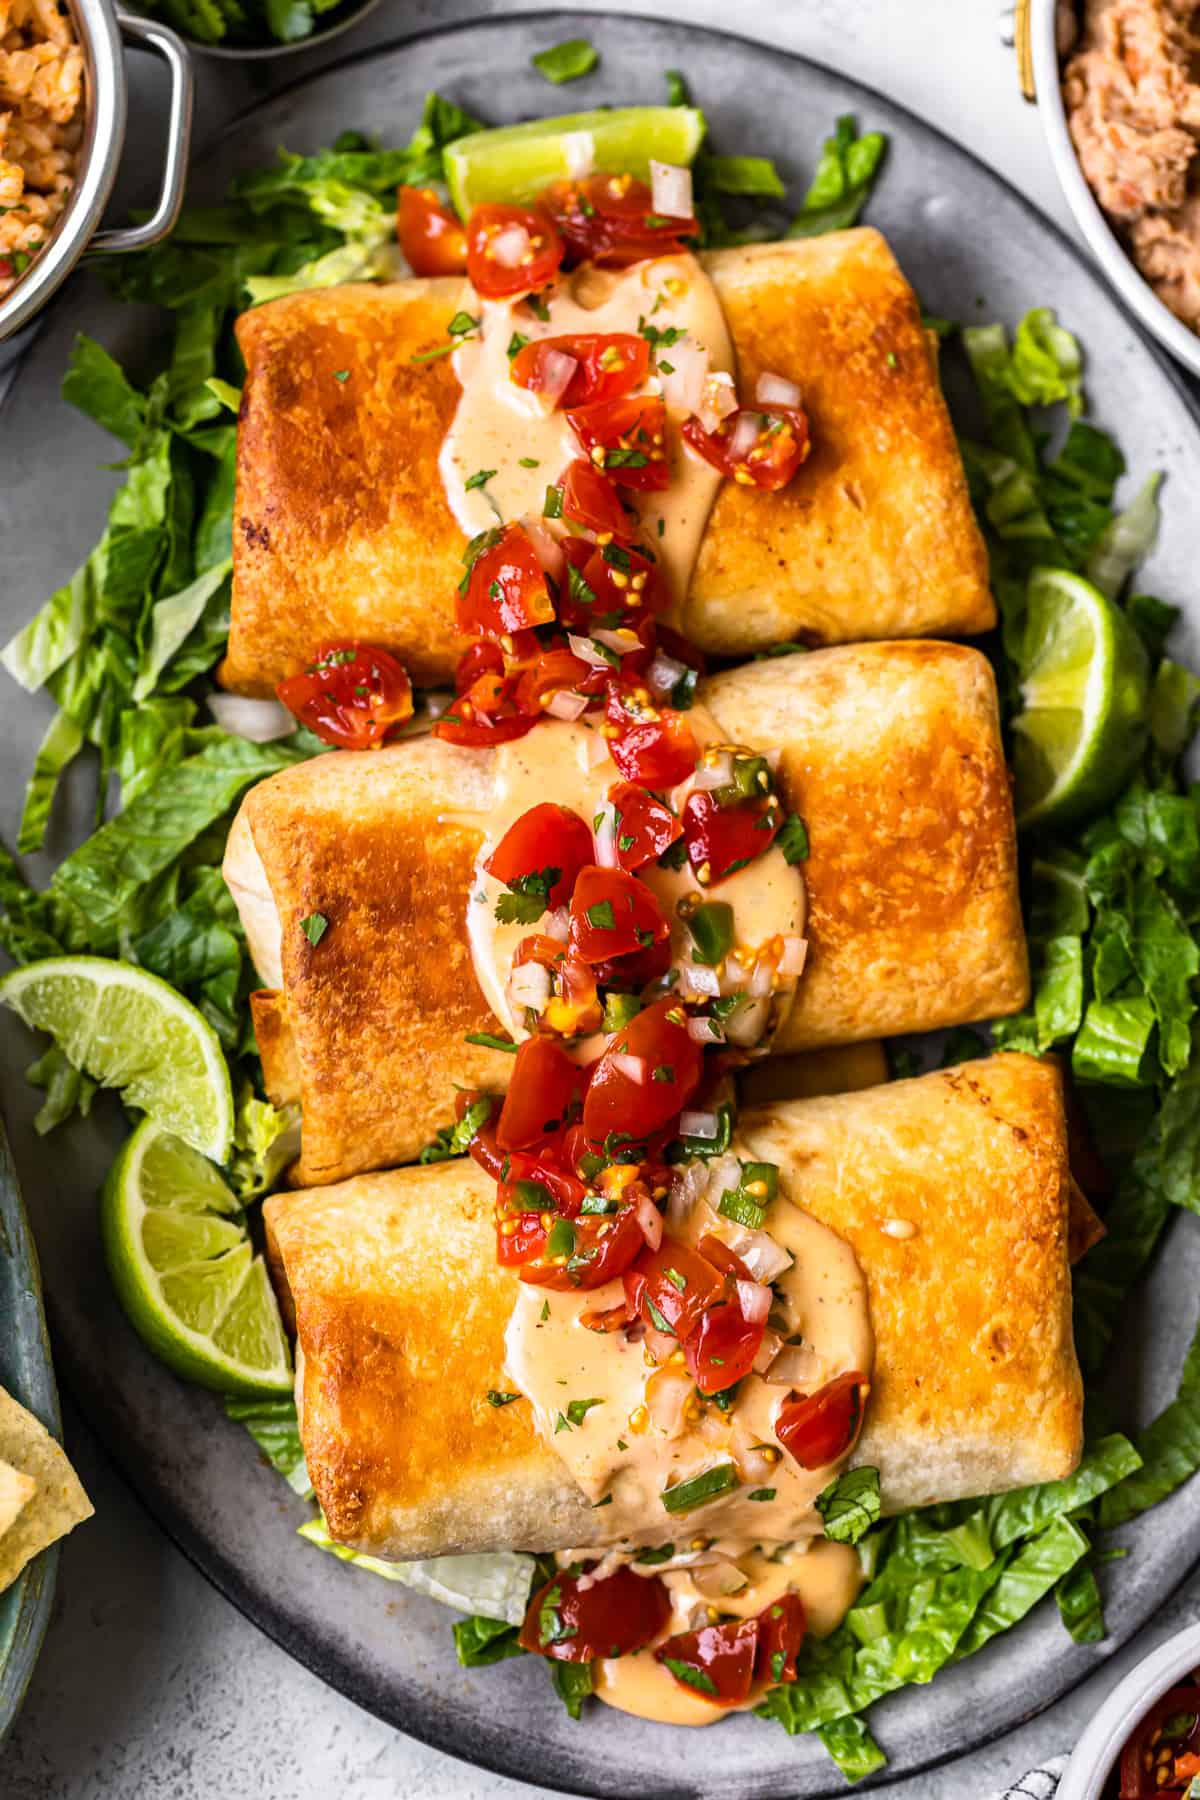 🔥 CHICKEN CHIMICHANGAS (Check out the full video recipe on my